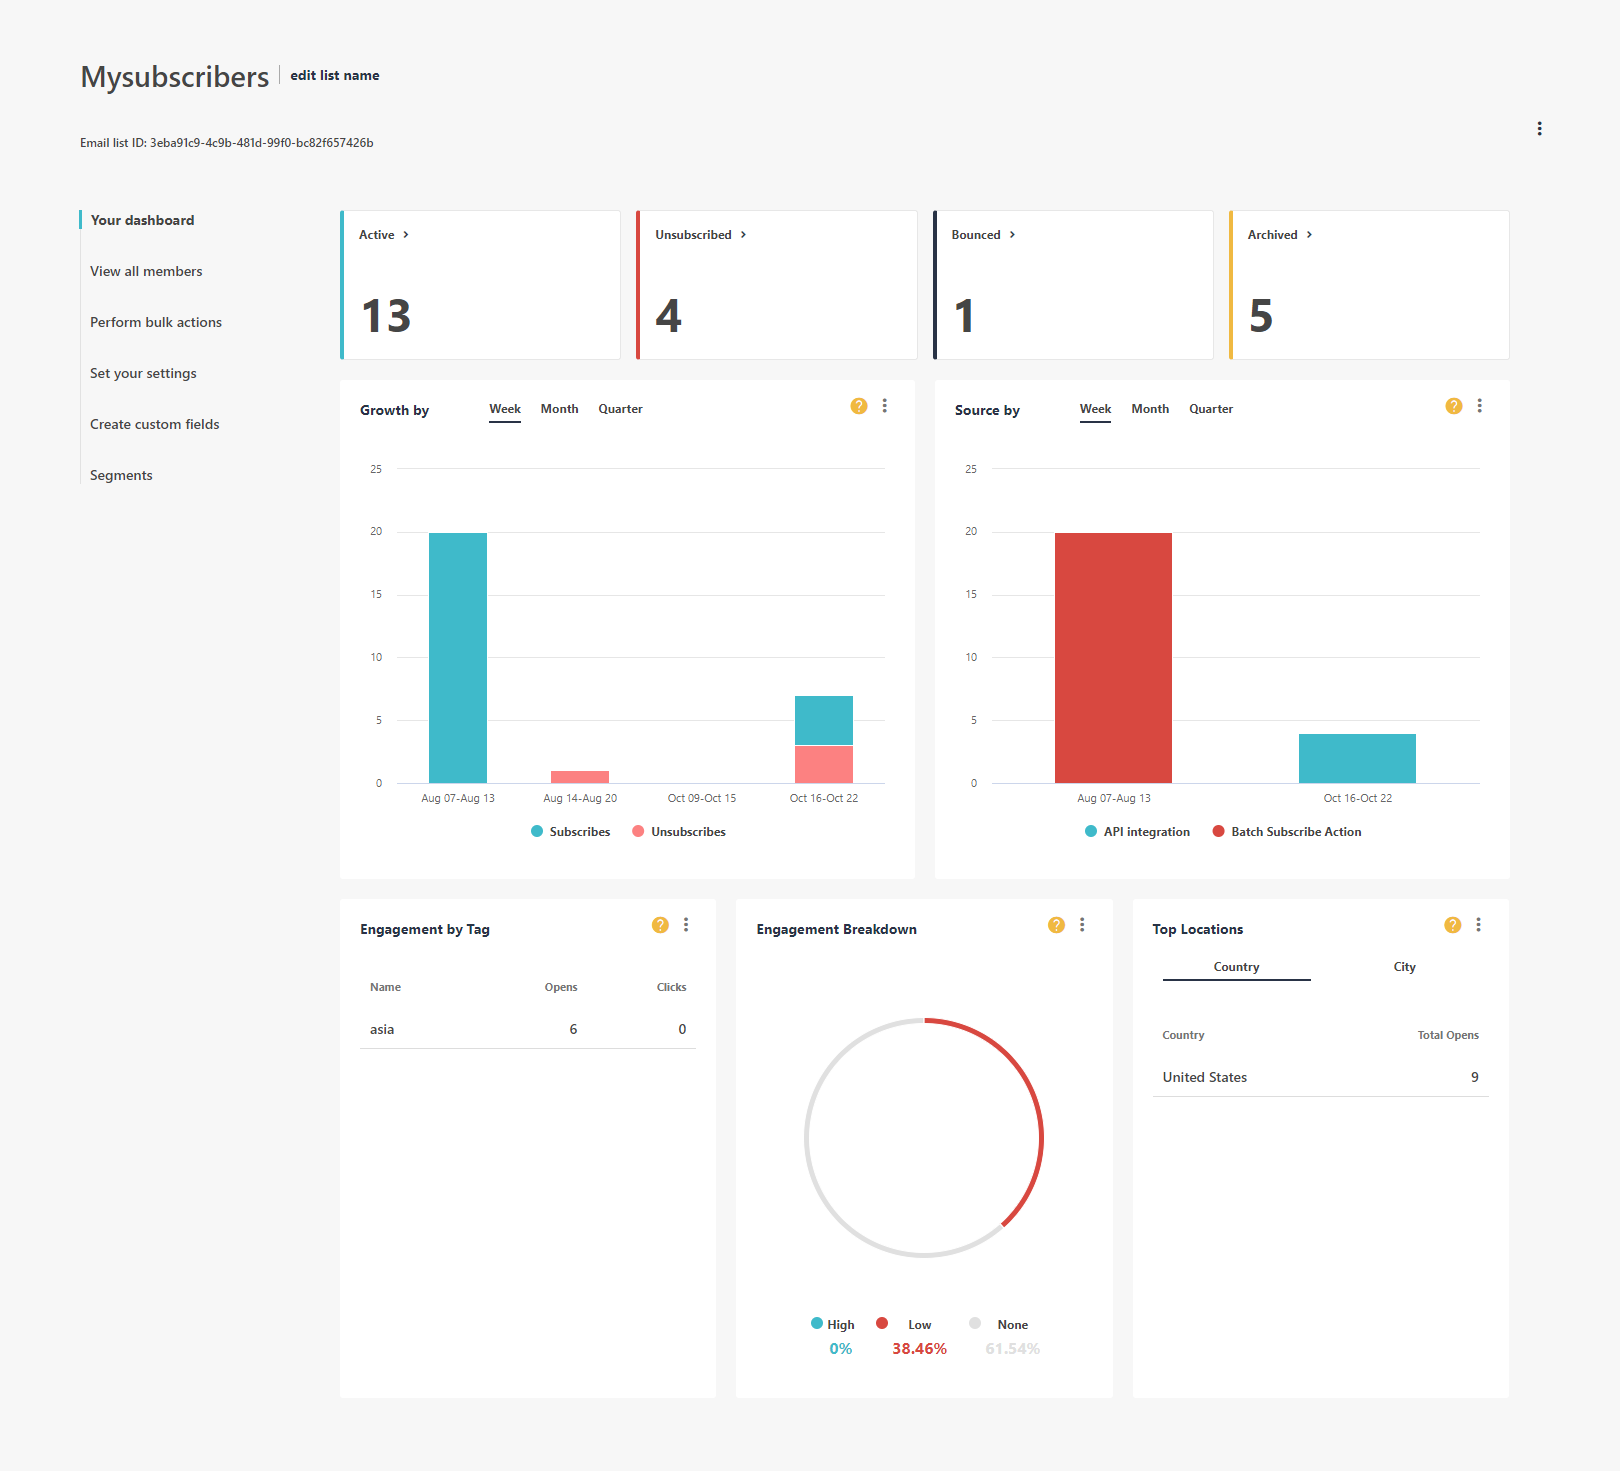 The email list dashboard